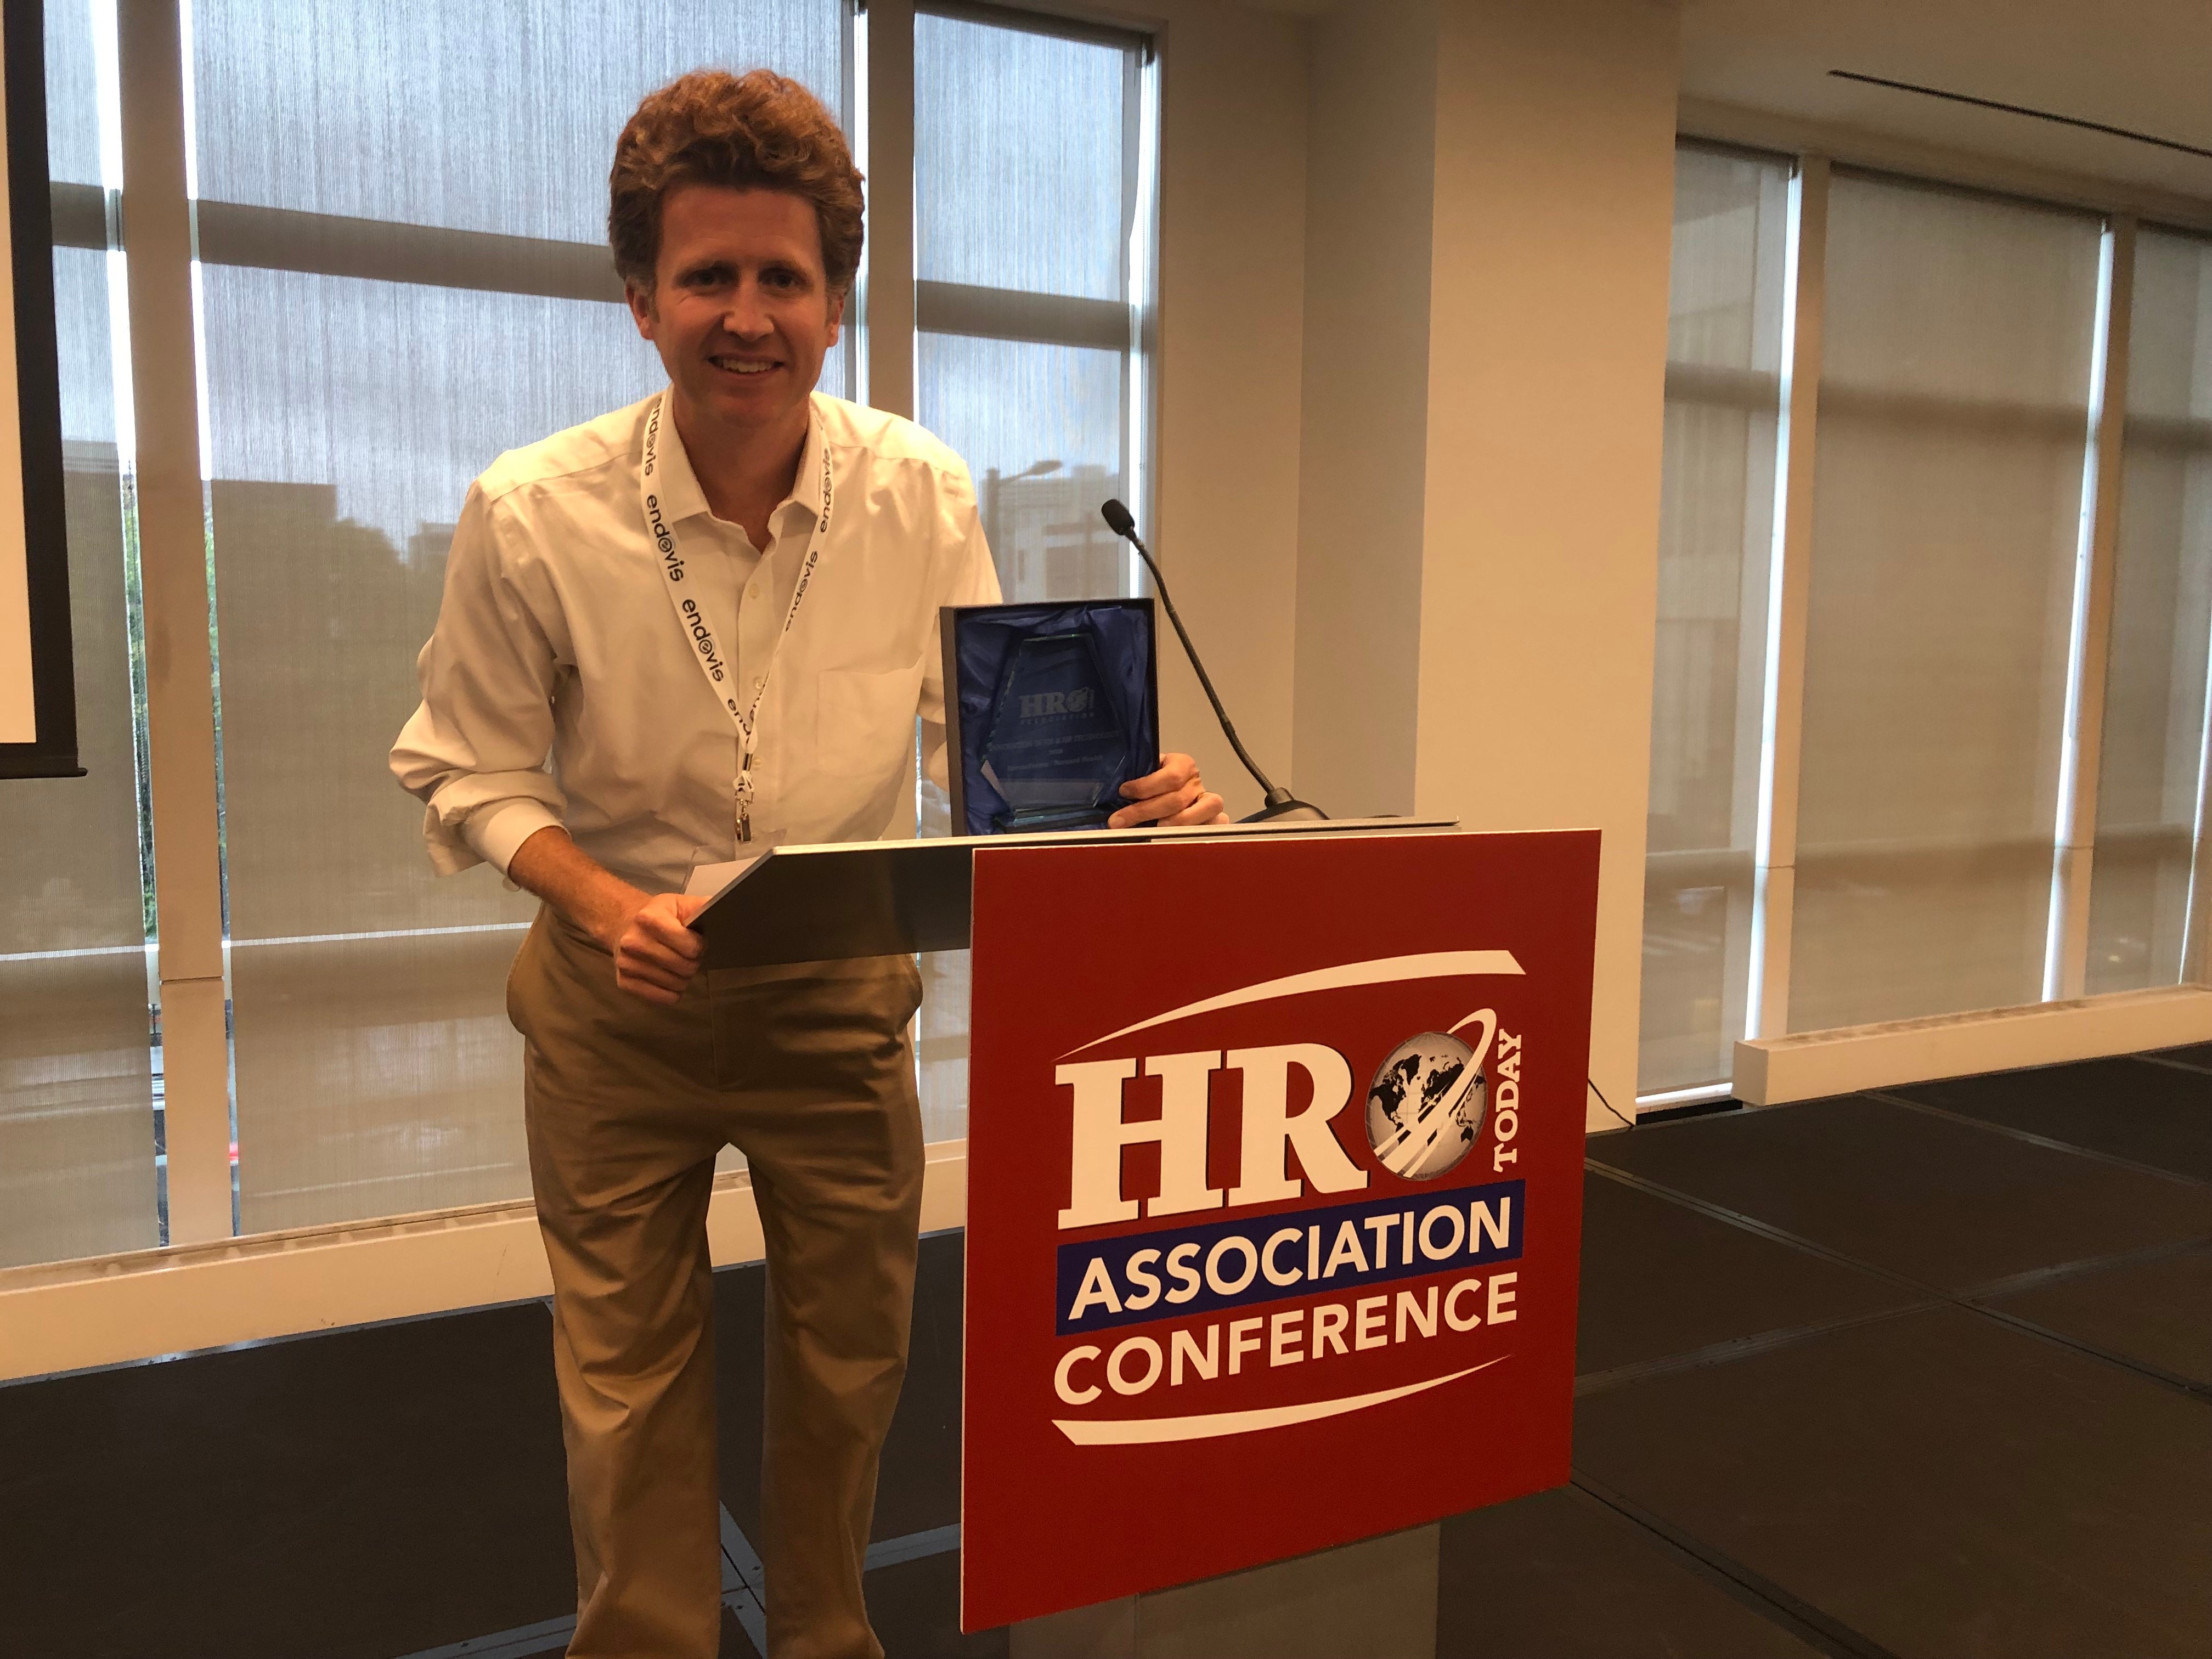 BernieForms recognized for its innovation in HR